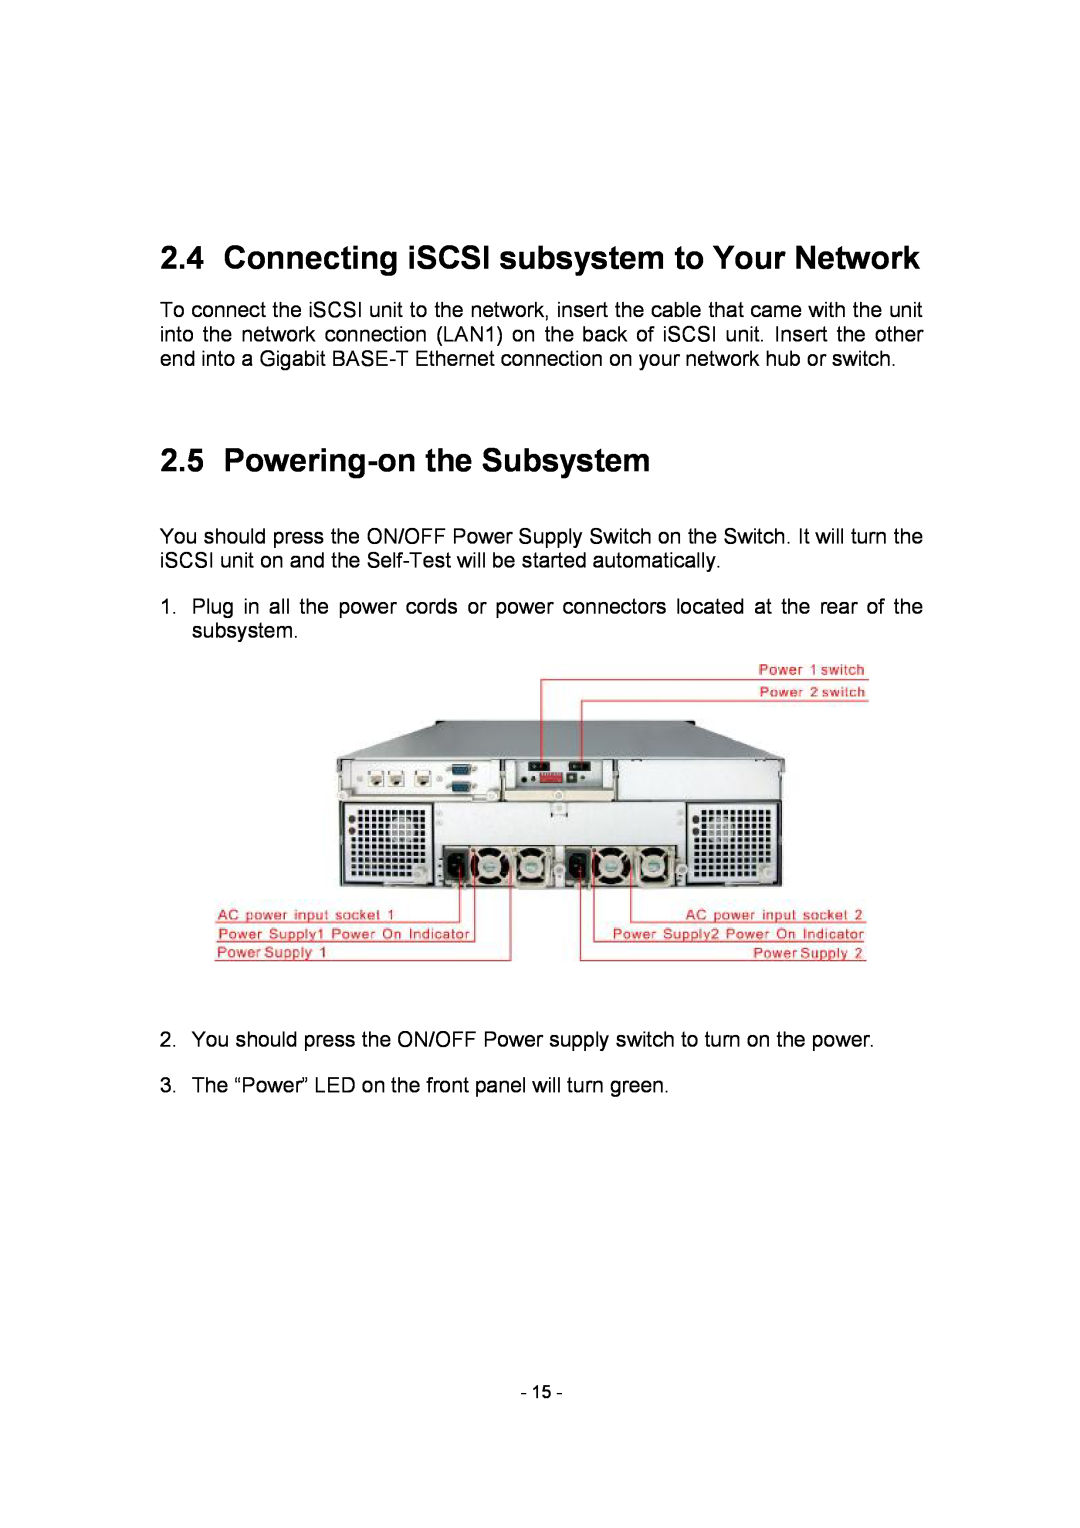 APC SCSI-SATA II manual Connecting iSCSI subsystem to Your Network, Powering-on the Subsystem 